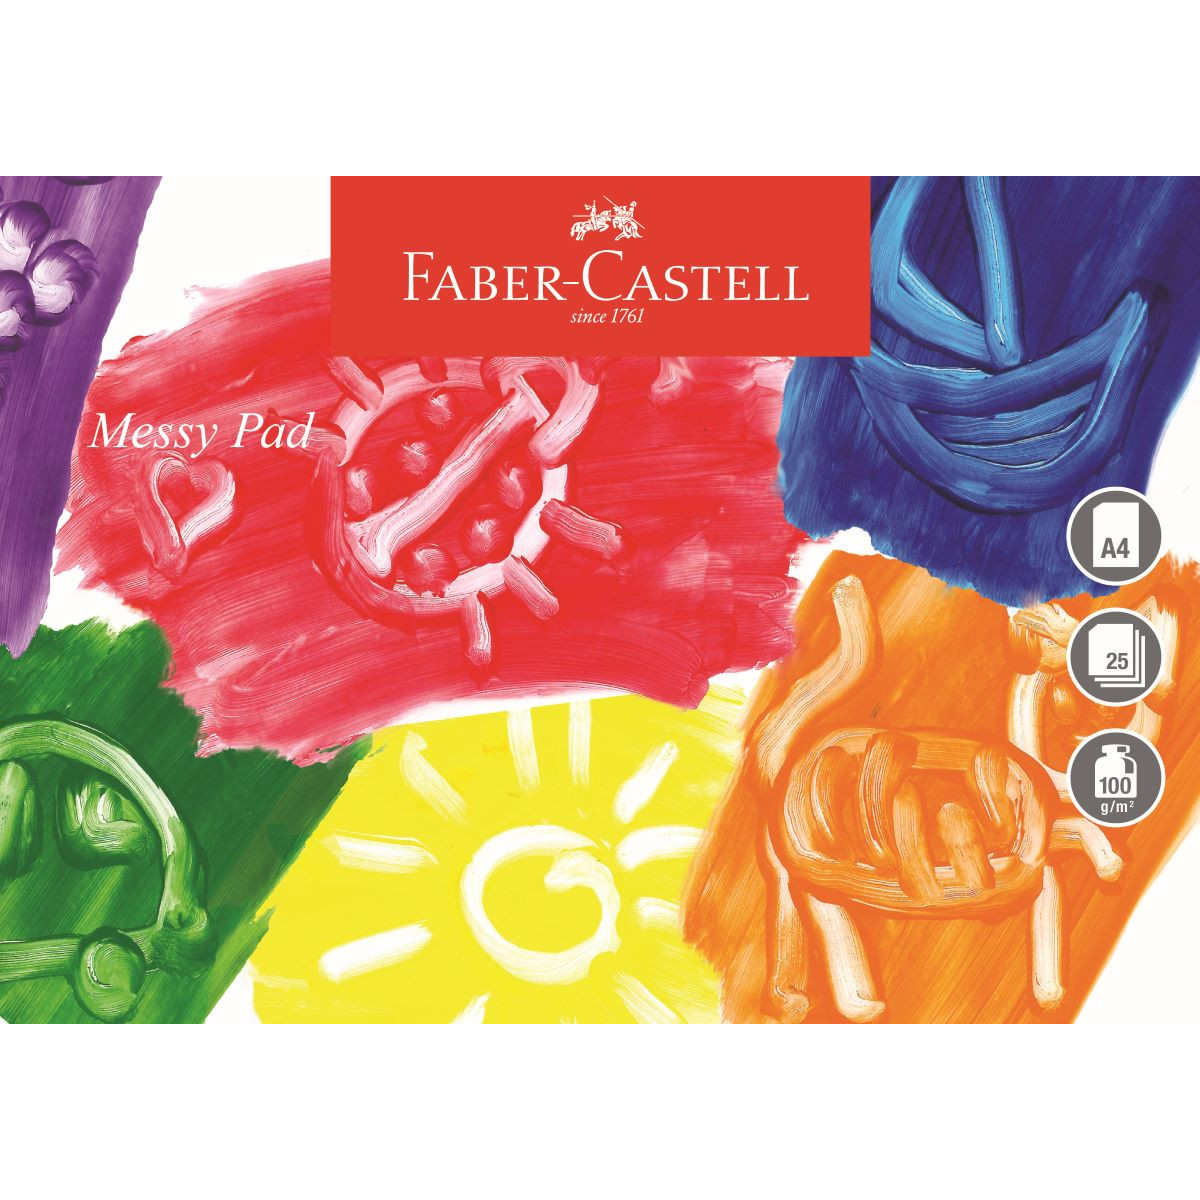 Faber-Castell A4 Messy Pad